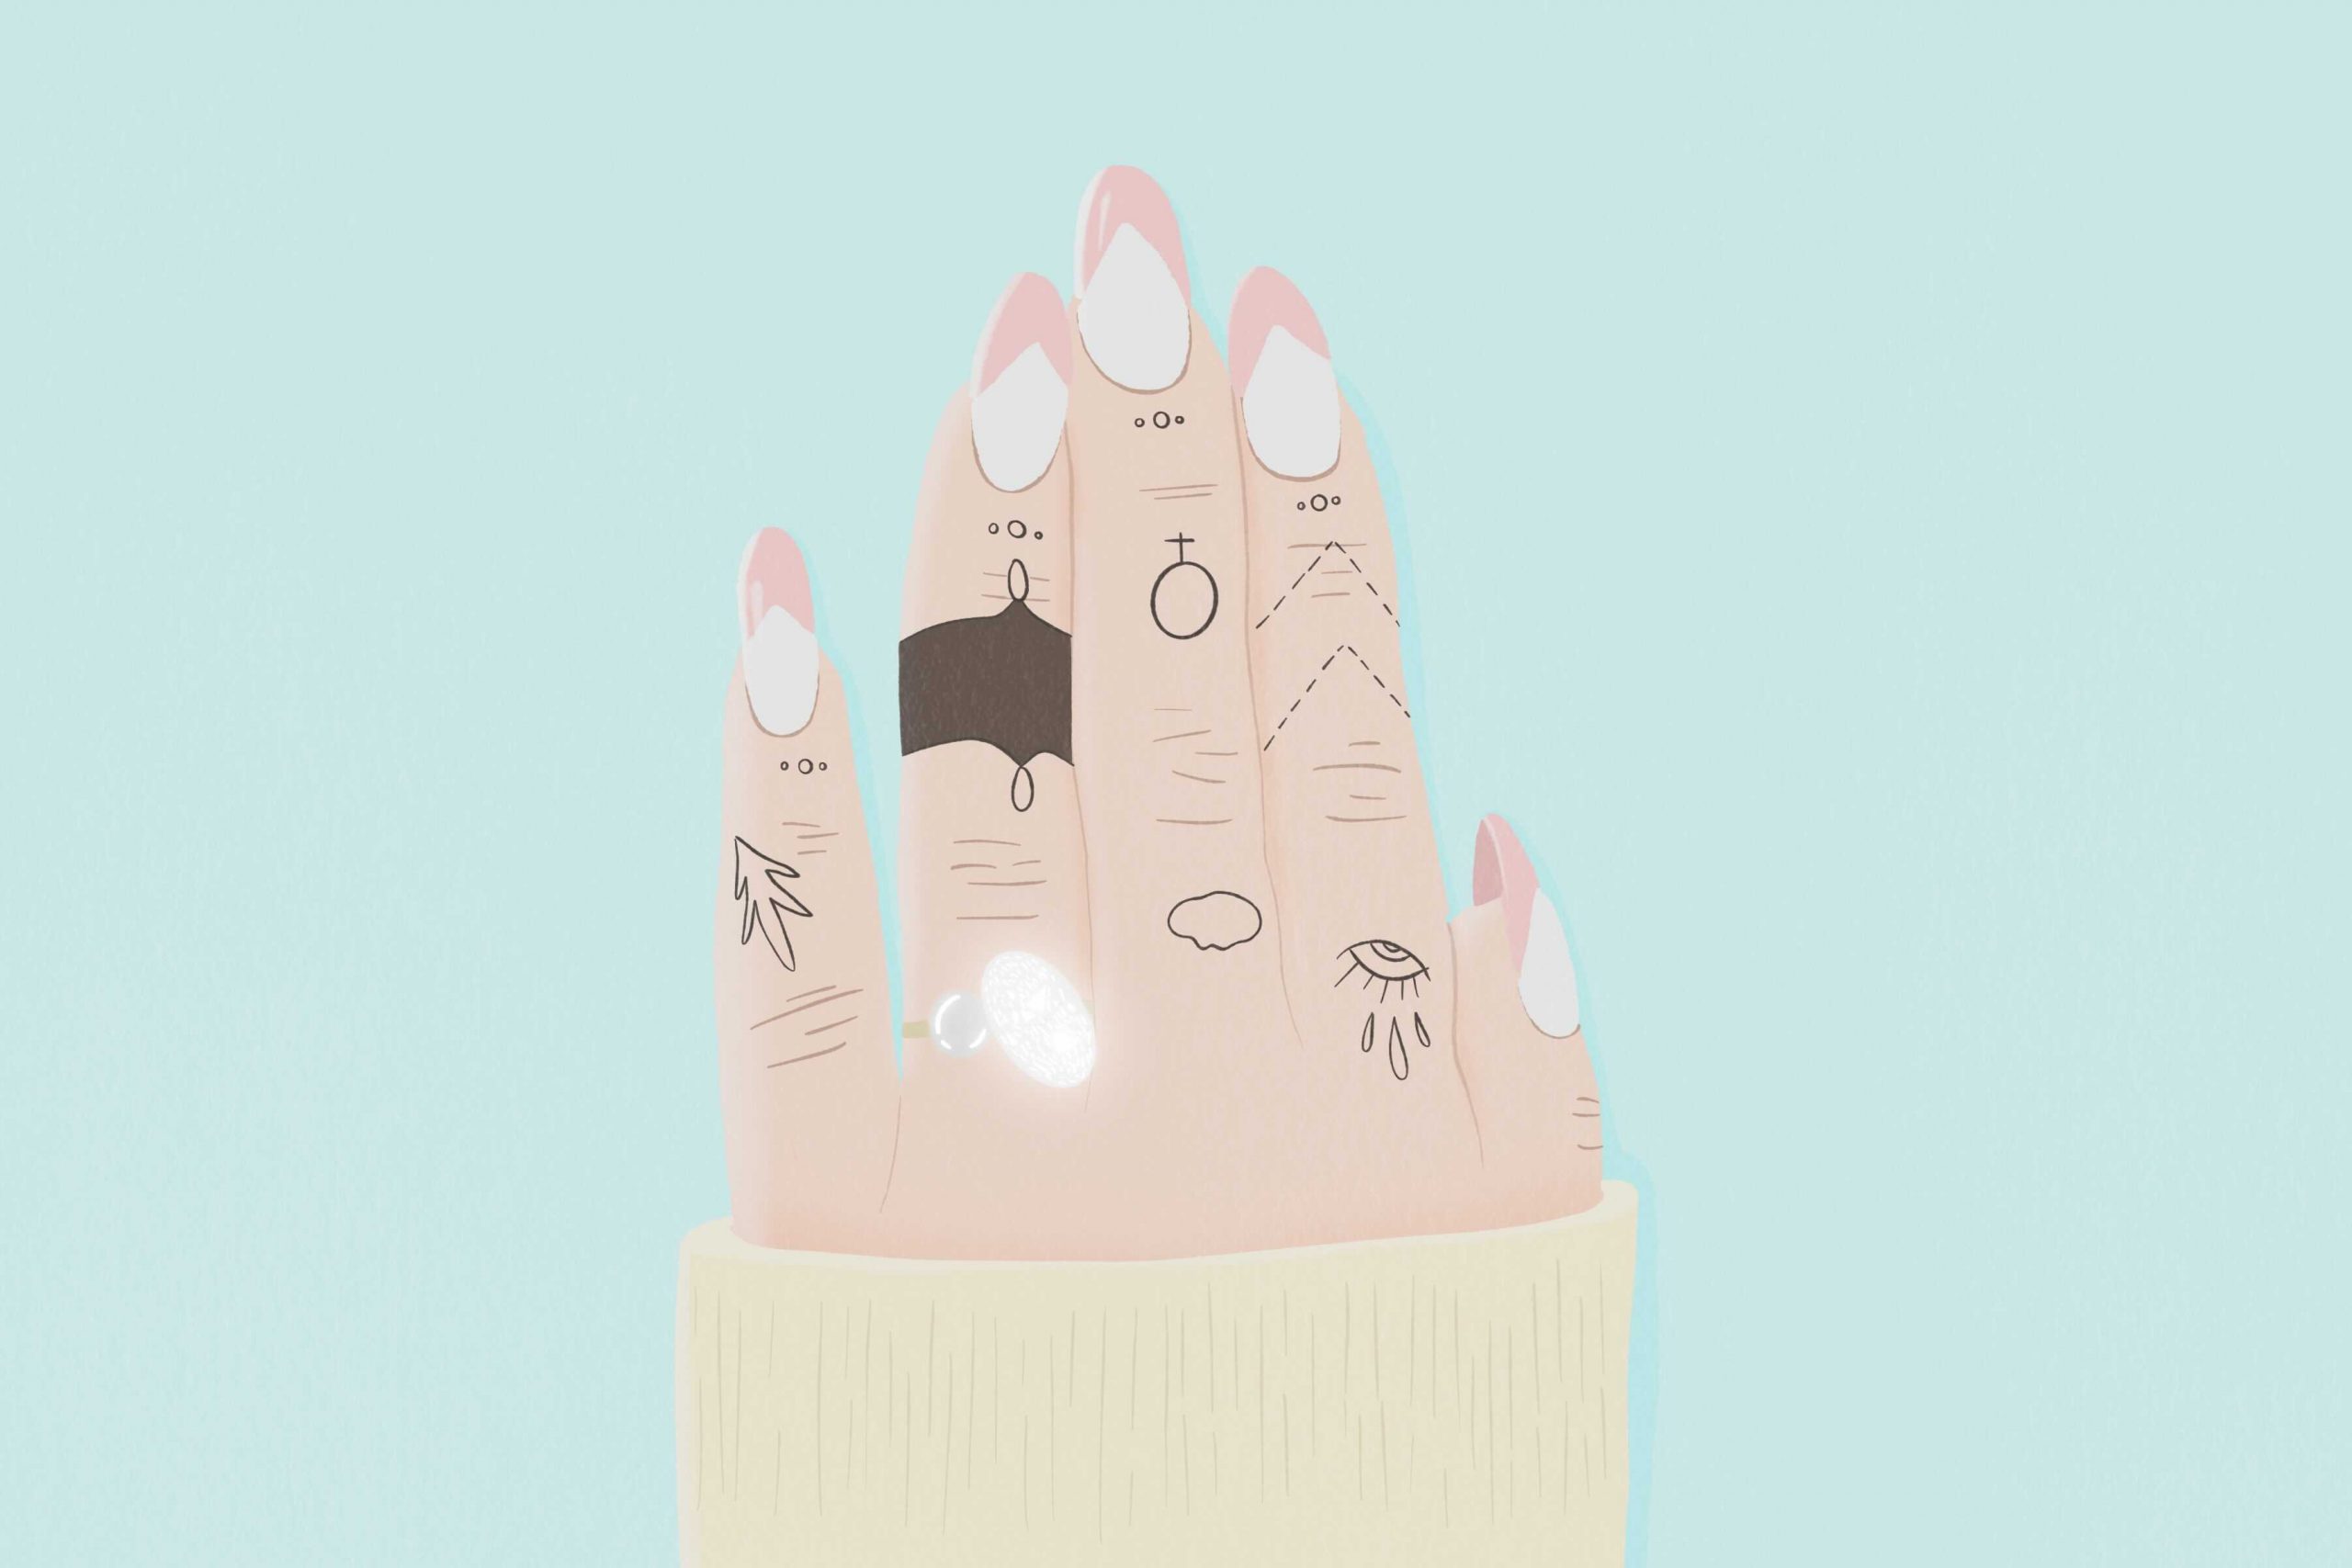 An illustration of Ariana Grande's hand with her engagement ring.